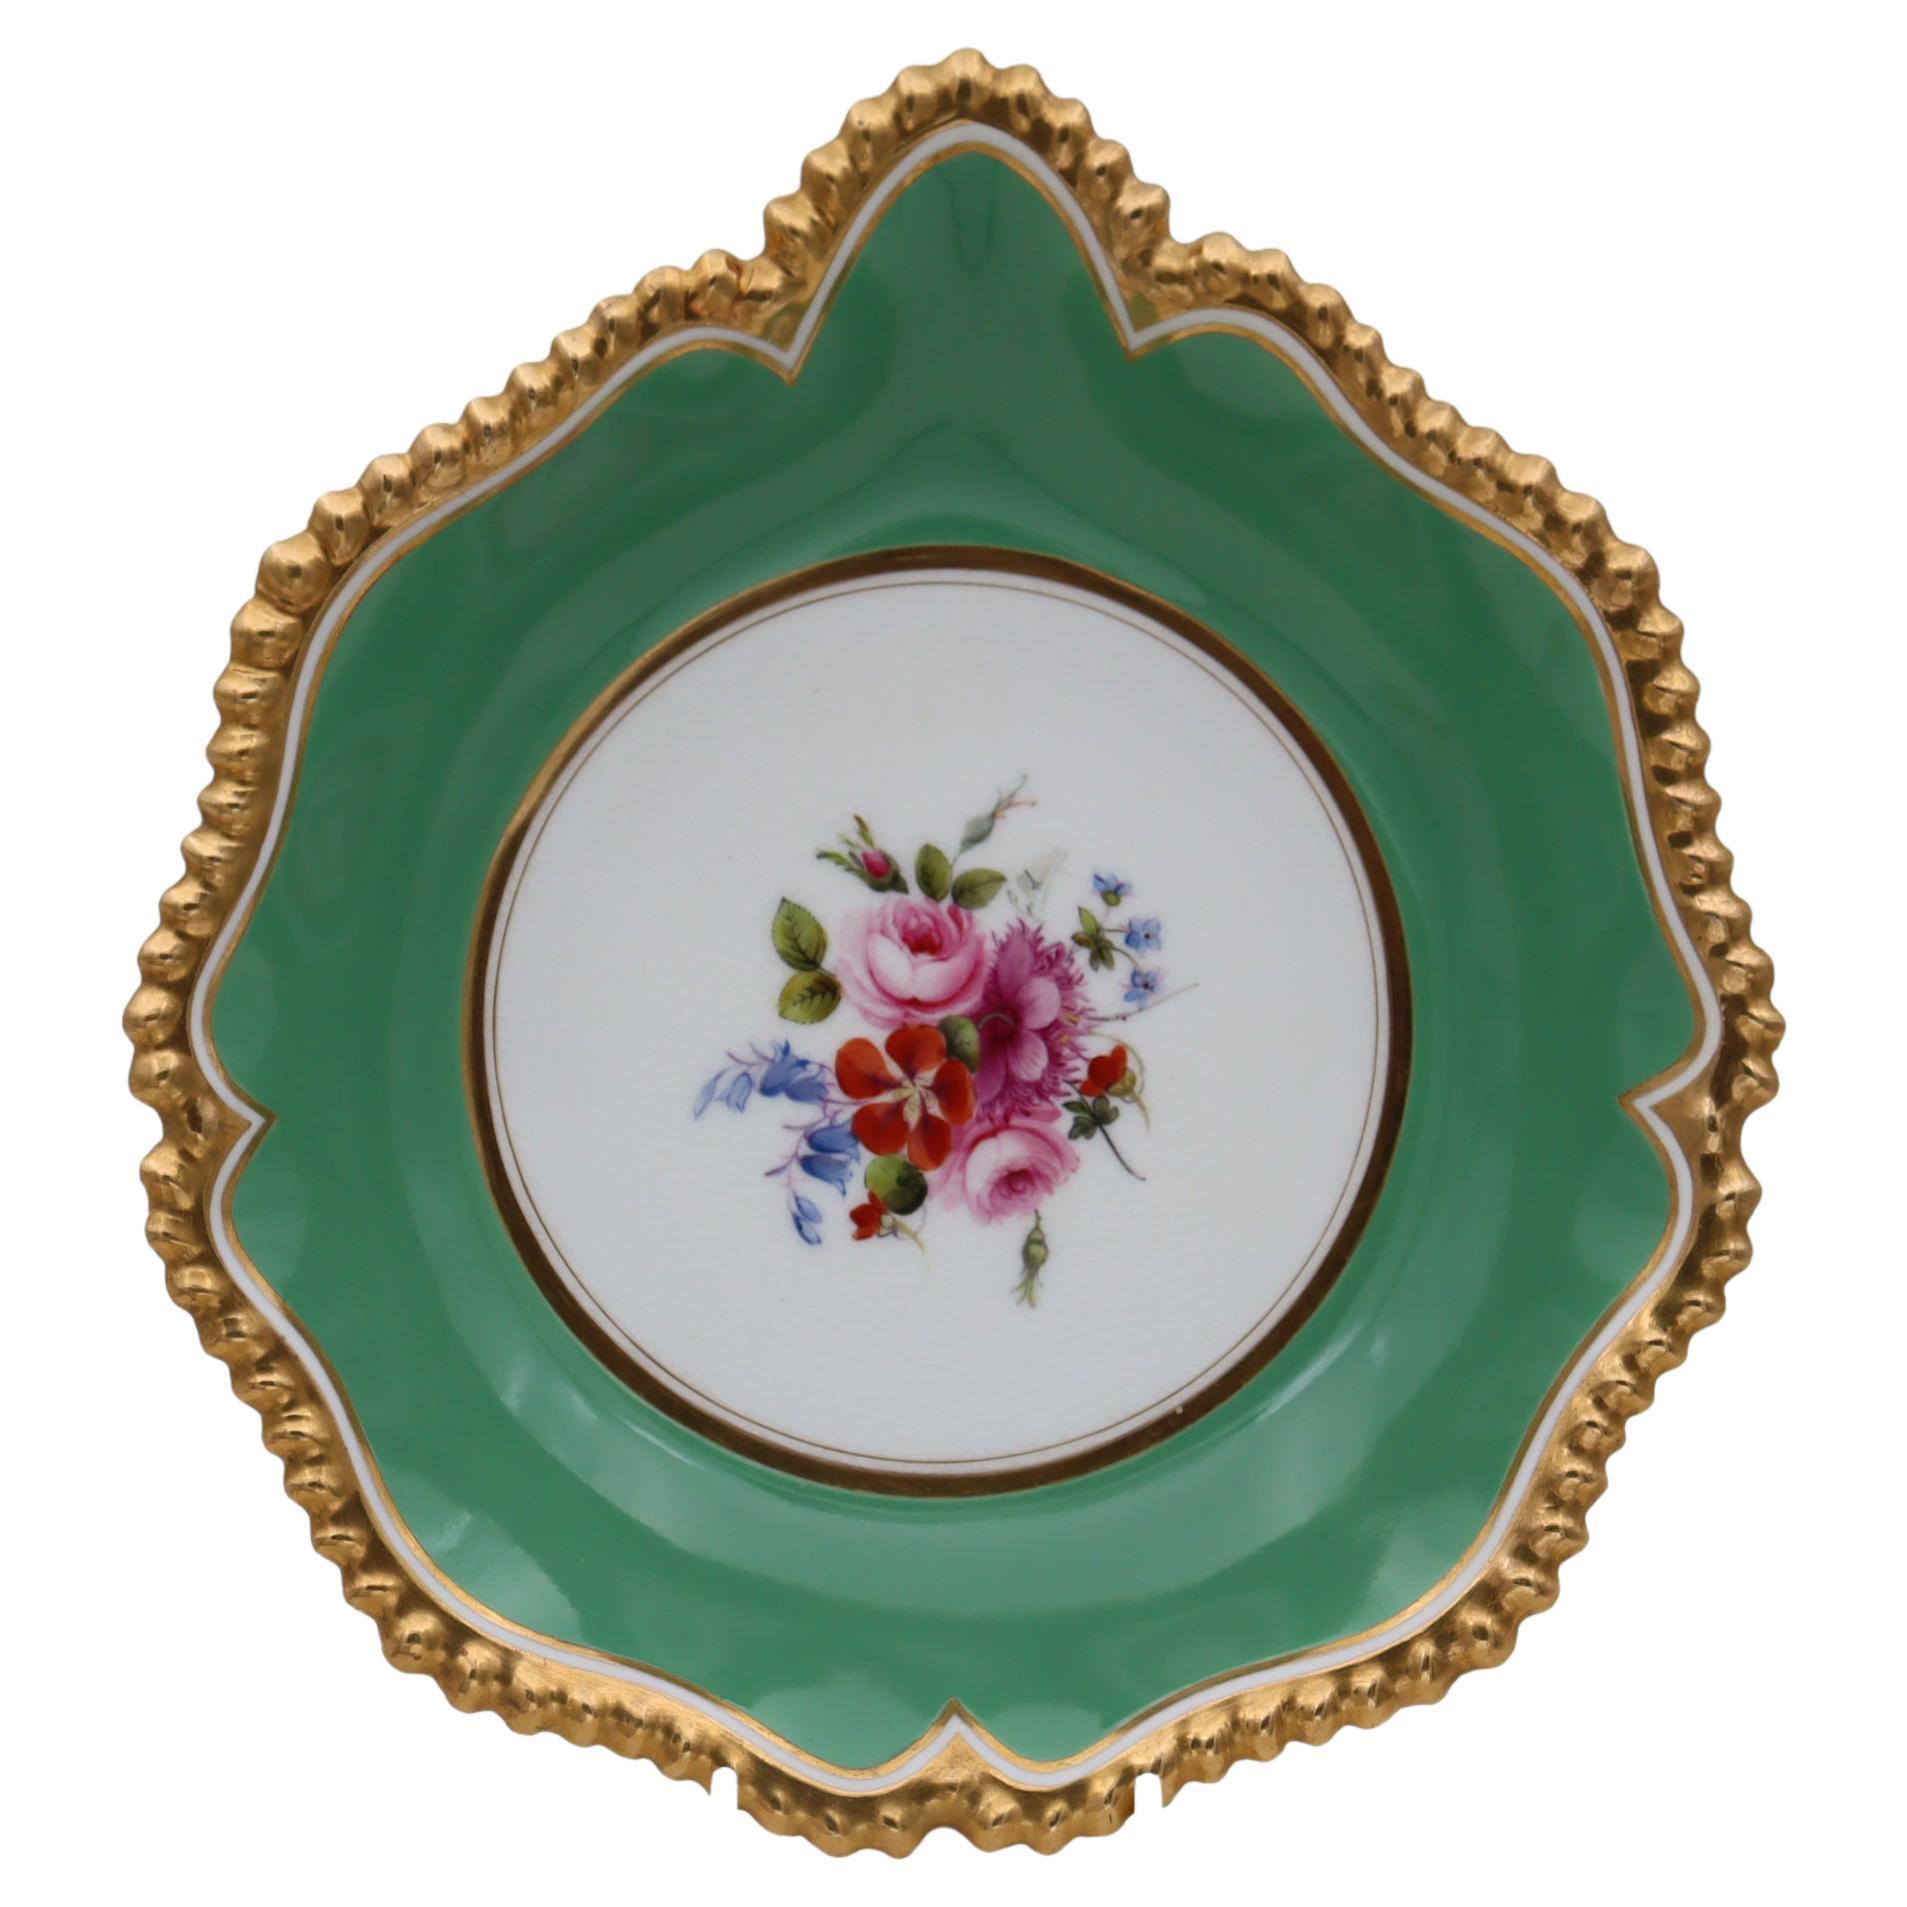 Where is Royal Worcester china made?